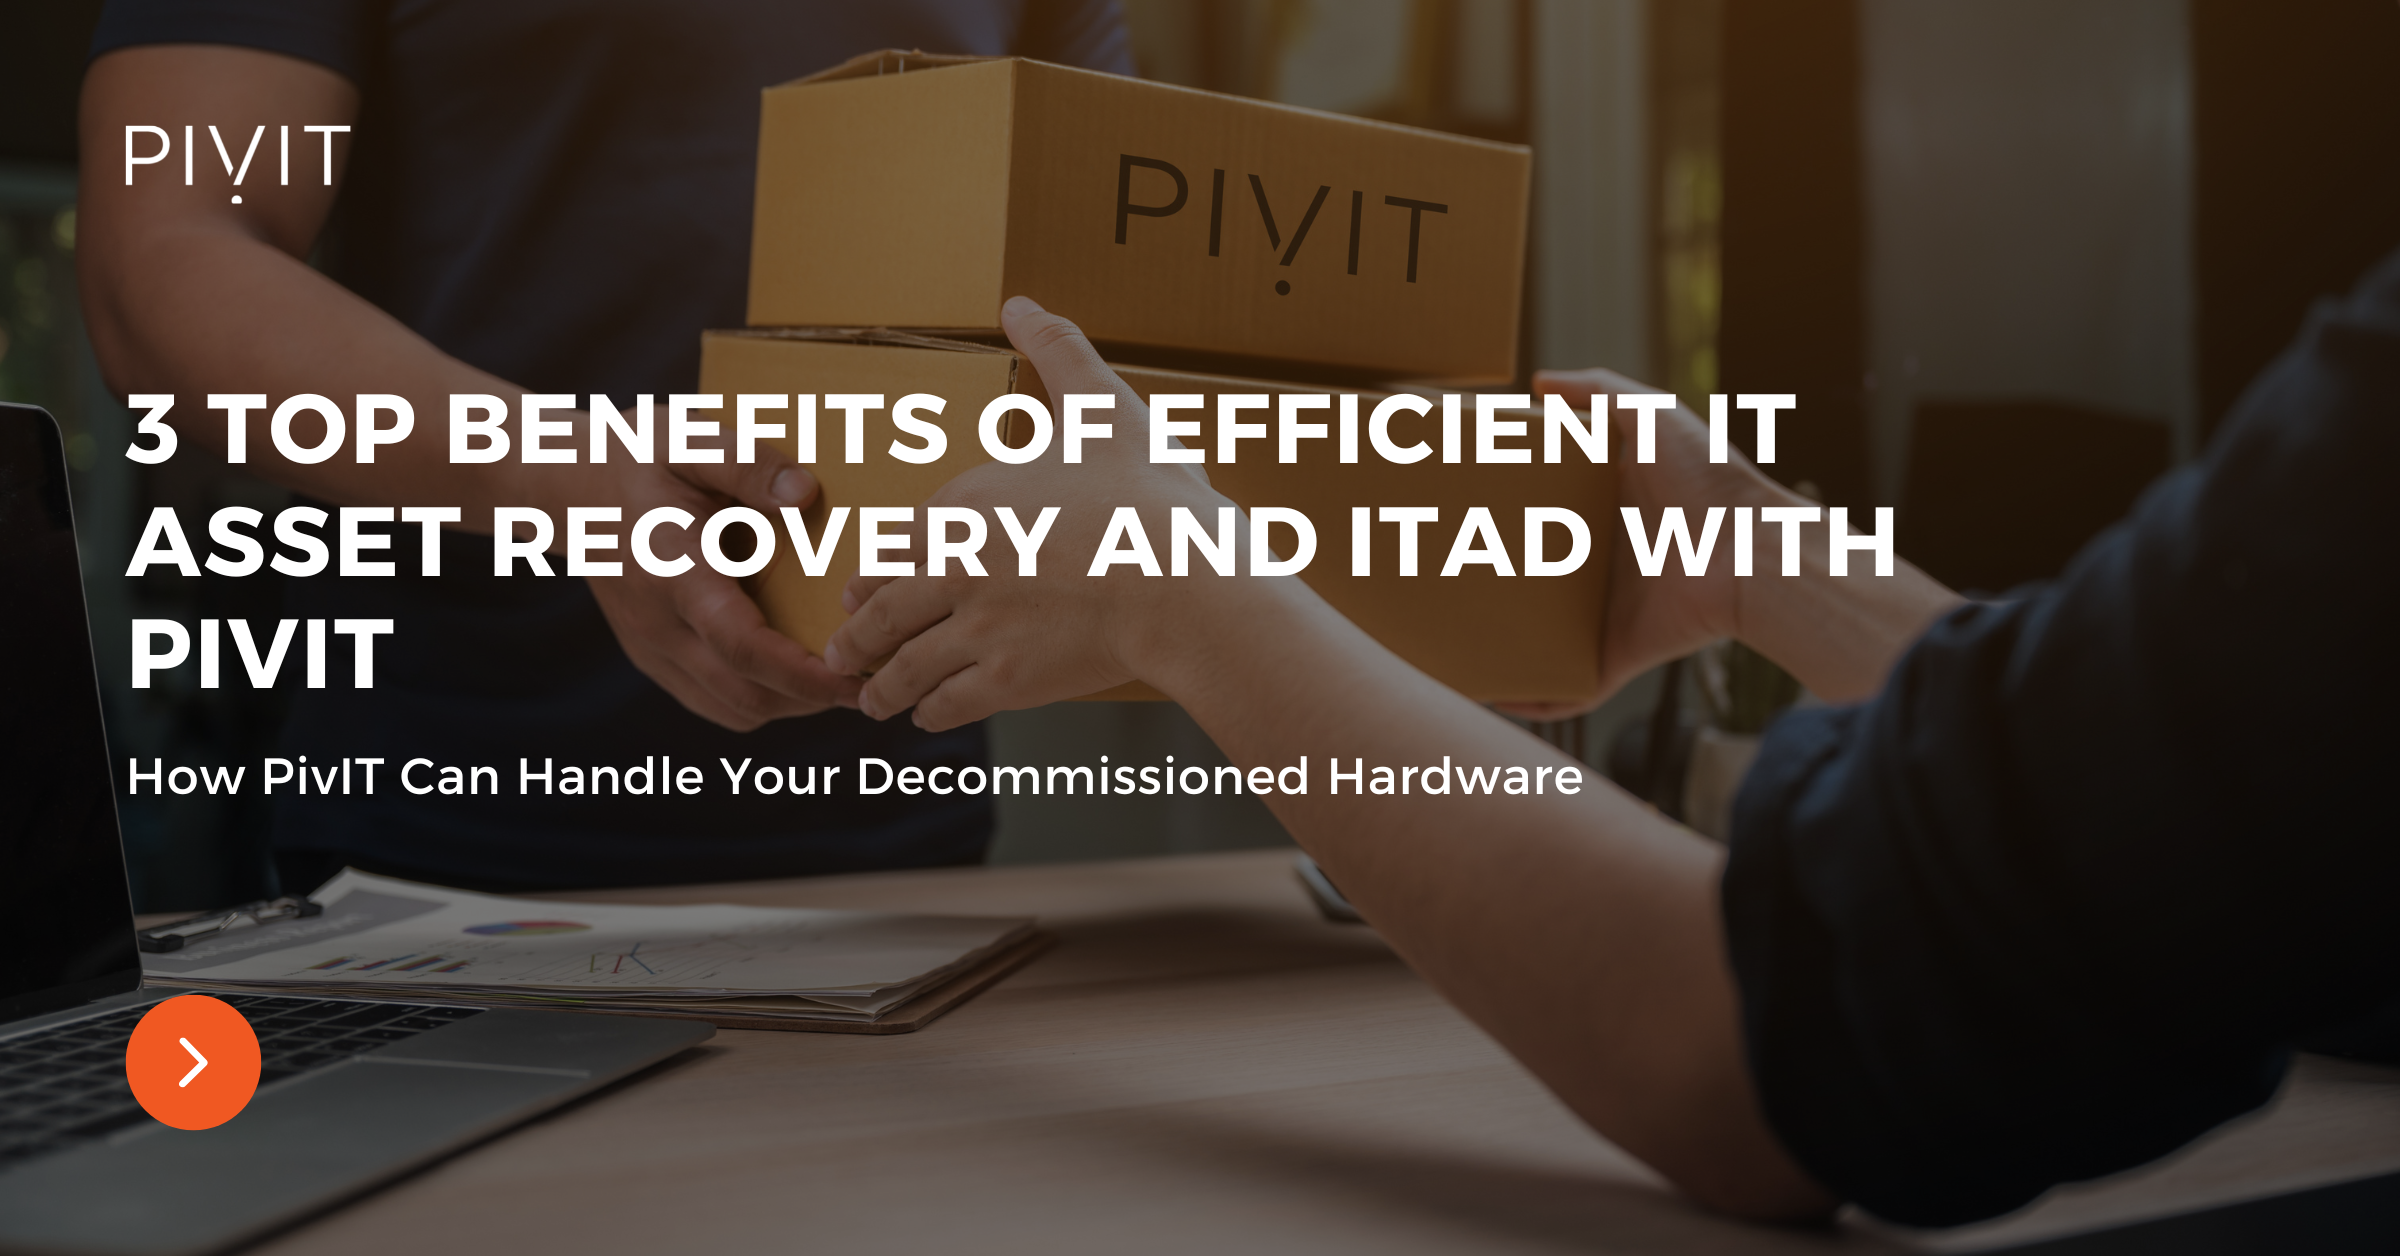 3 Top Benefits of Efficient IT Asset Recovery and ITAD With PivIT